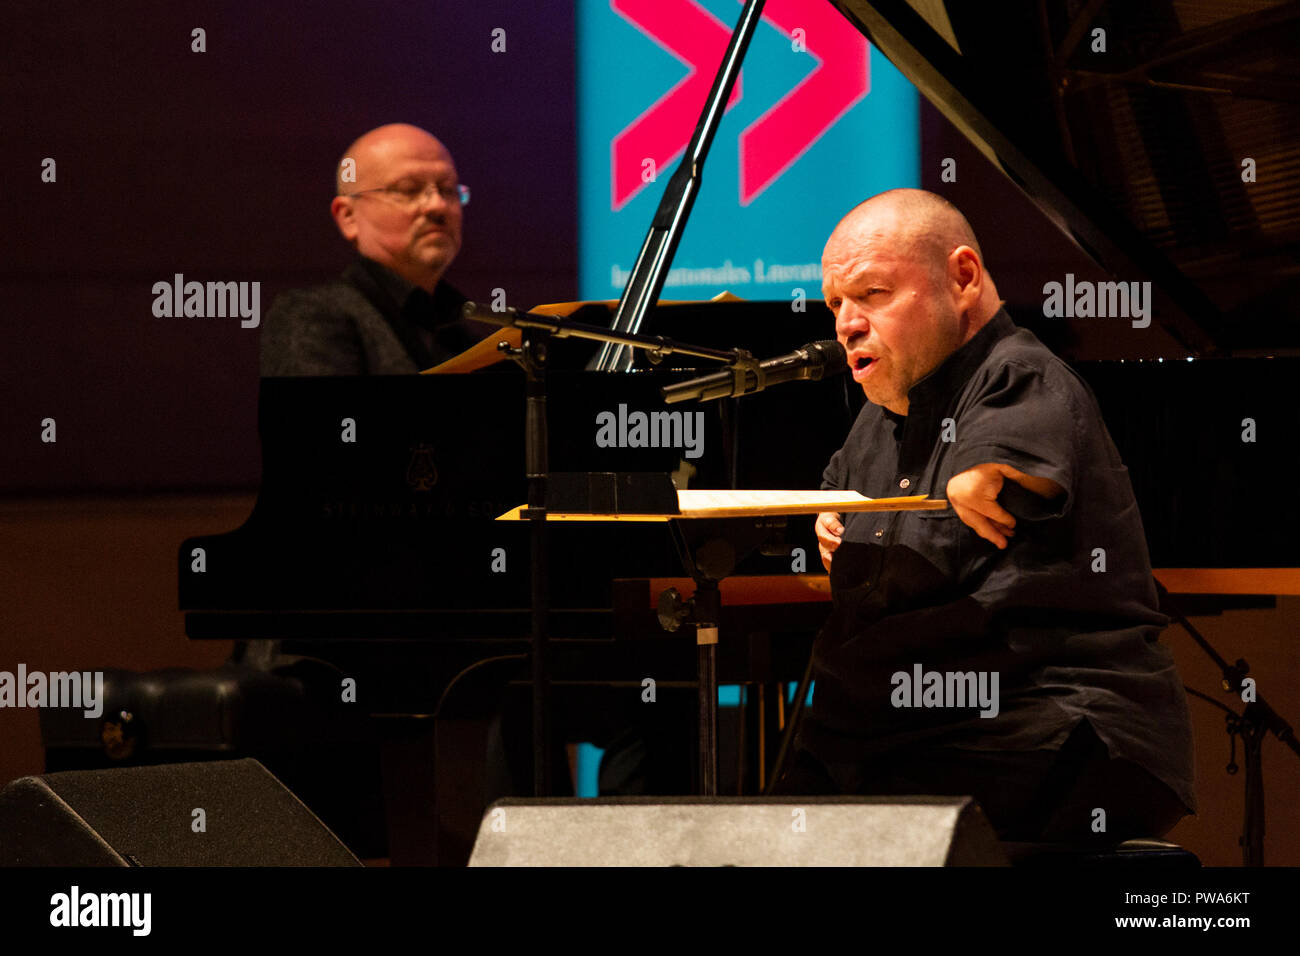 Essen, Germany. 10 October 2018. Musicians Frank Chastenier and Thomas Quasthoff perform at the reading of 'Die buckelige Verwandtschaft' performed by three generations of the Thalbach Family: Katharina Thalbach, Nellie Thalbach and Anna Thalbach. The second lit.RUHR literature festival takes place from 9 to 14 October 2018 with more than 80 events in the Ruhr Area. Stock Photo